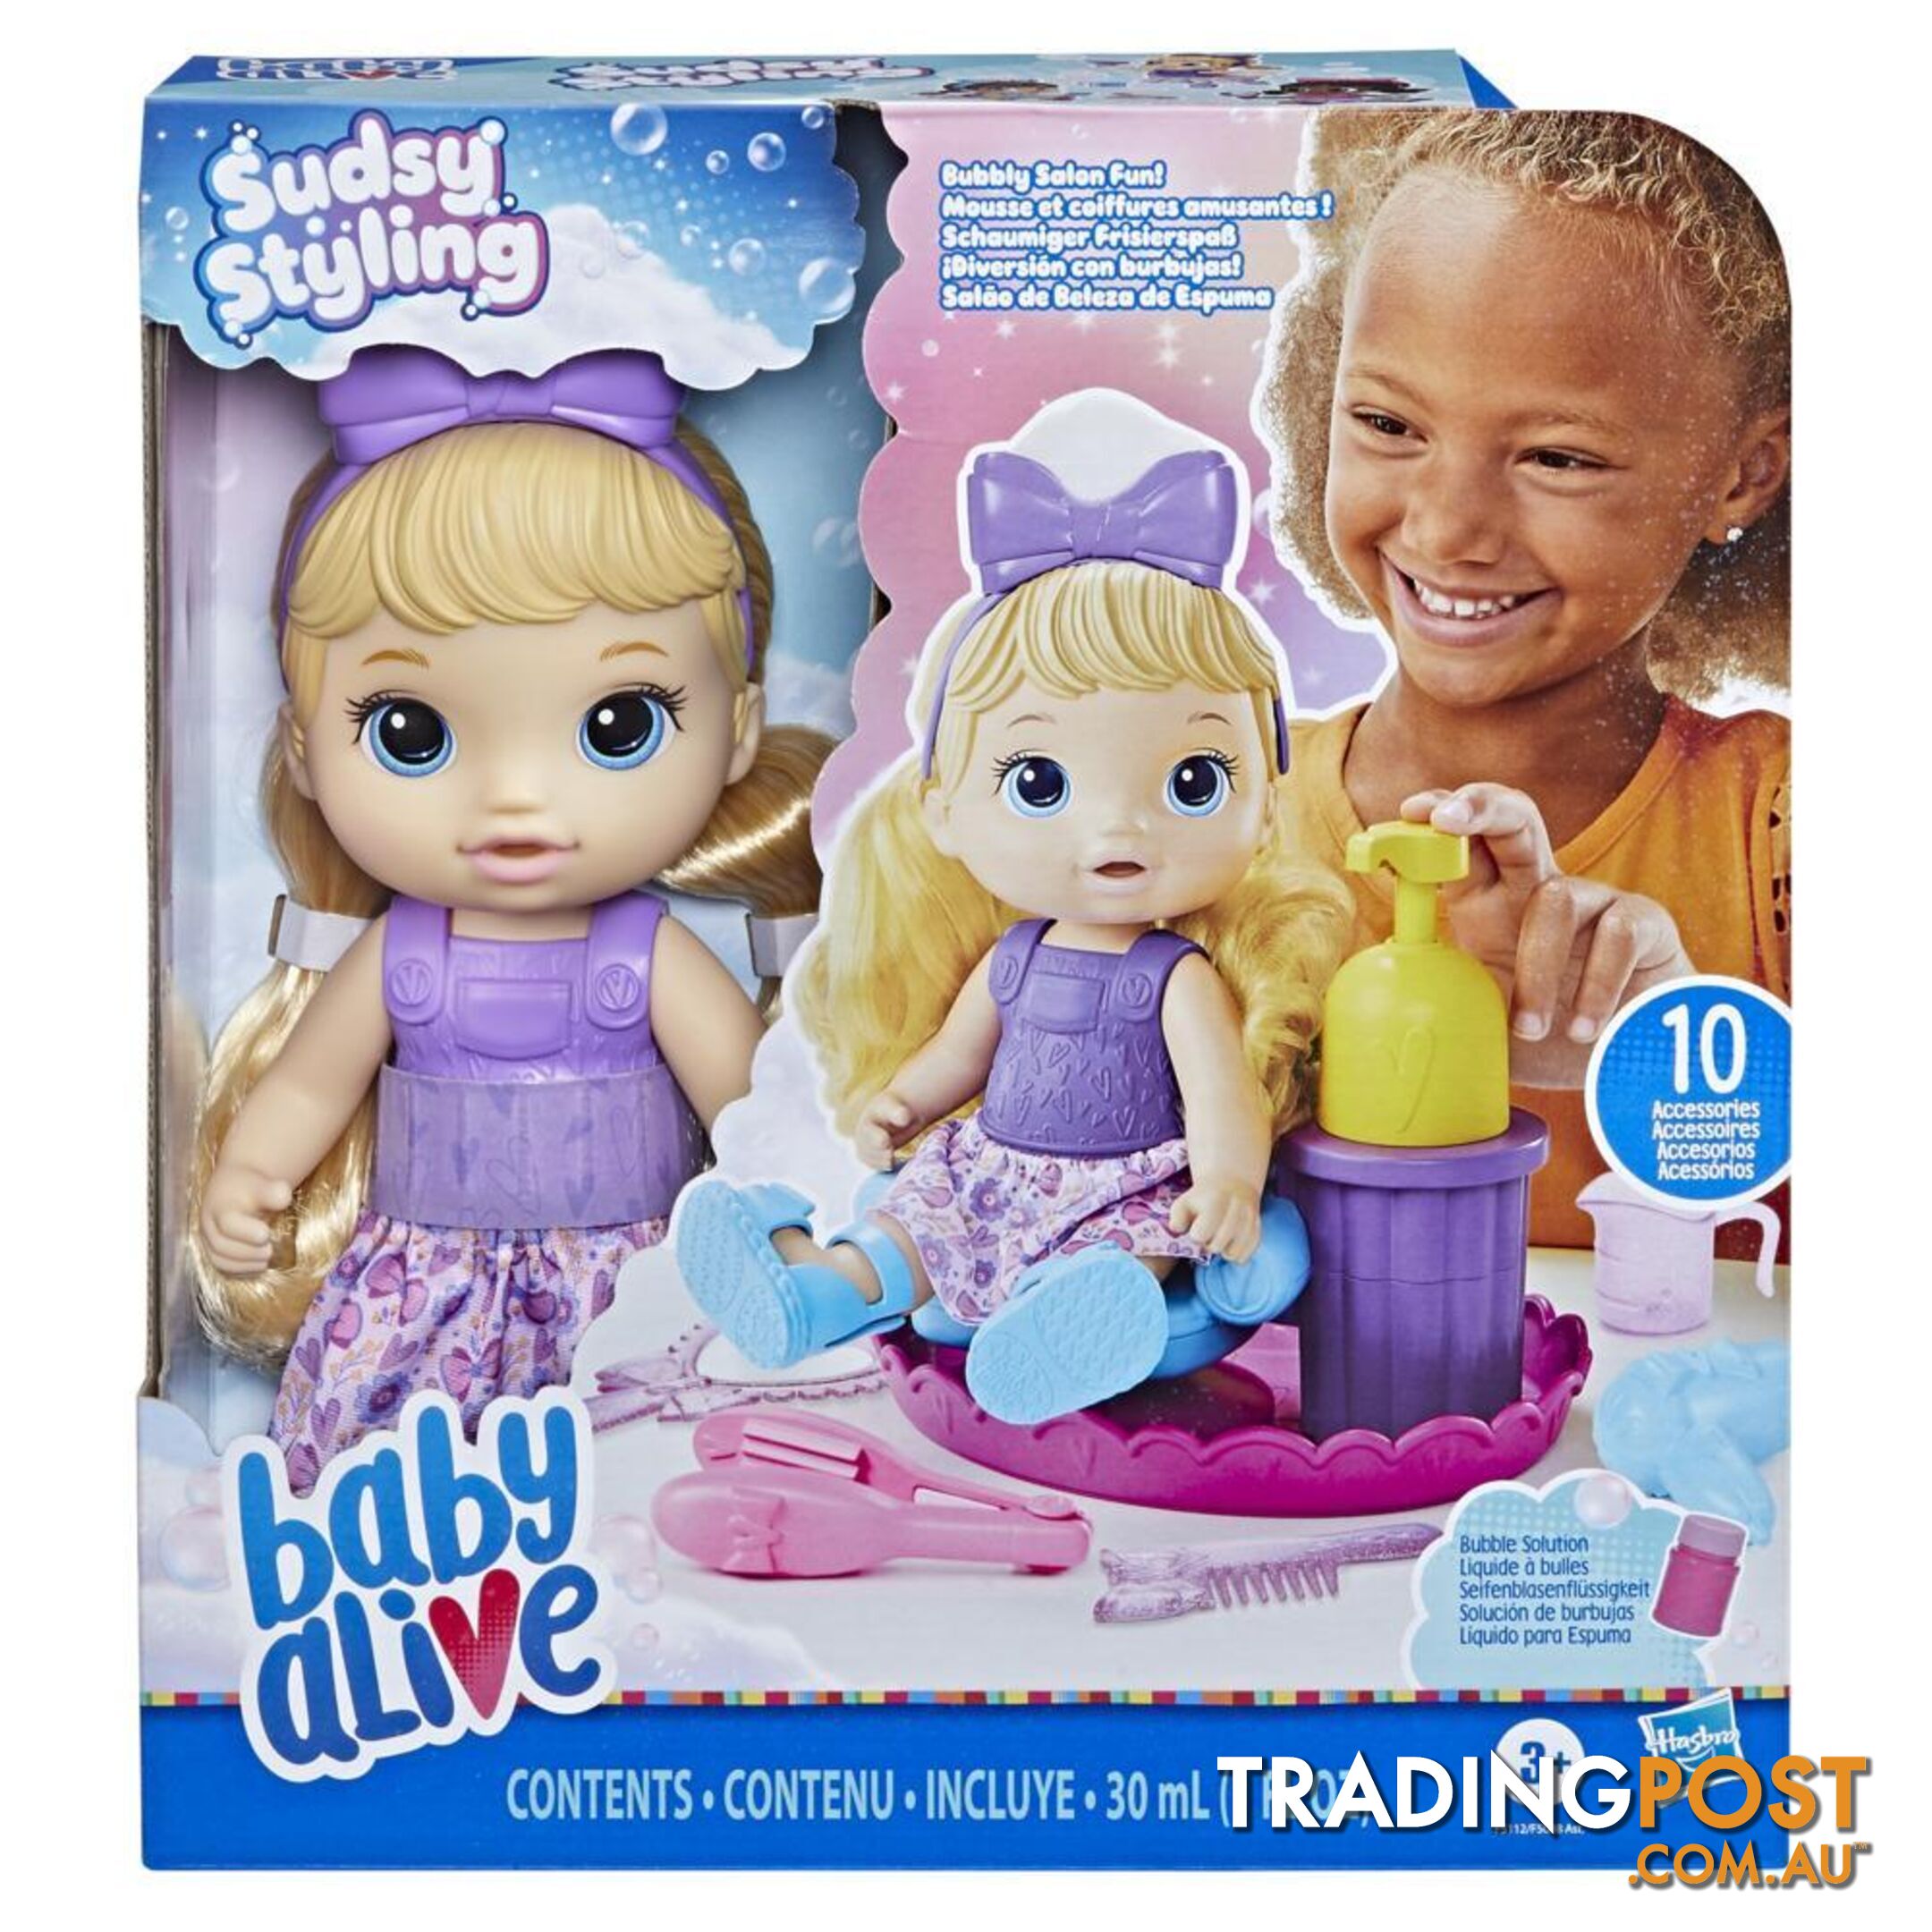 Baby Alive Sudsy Styling 12-inch Salon Baby Doll Incl Accessories Bubble Solution Hasbro - Hbf51125xoo - 5010994126896